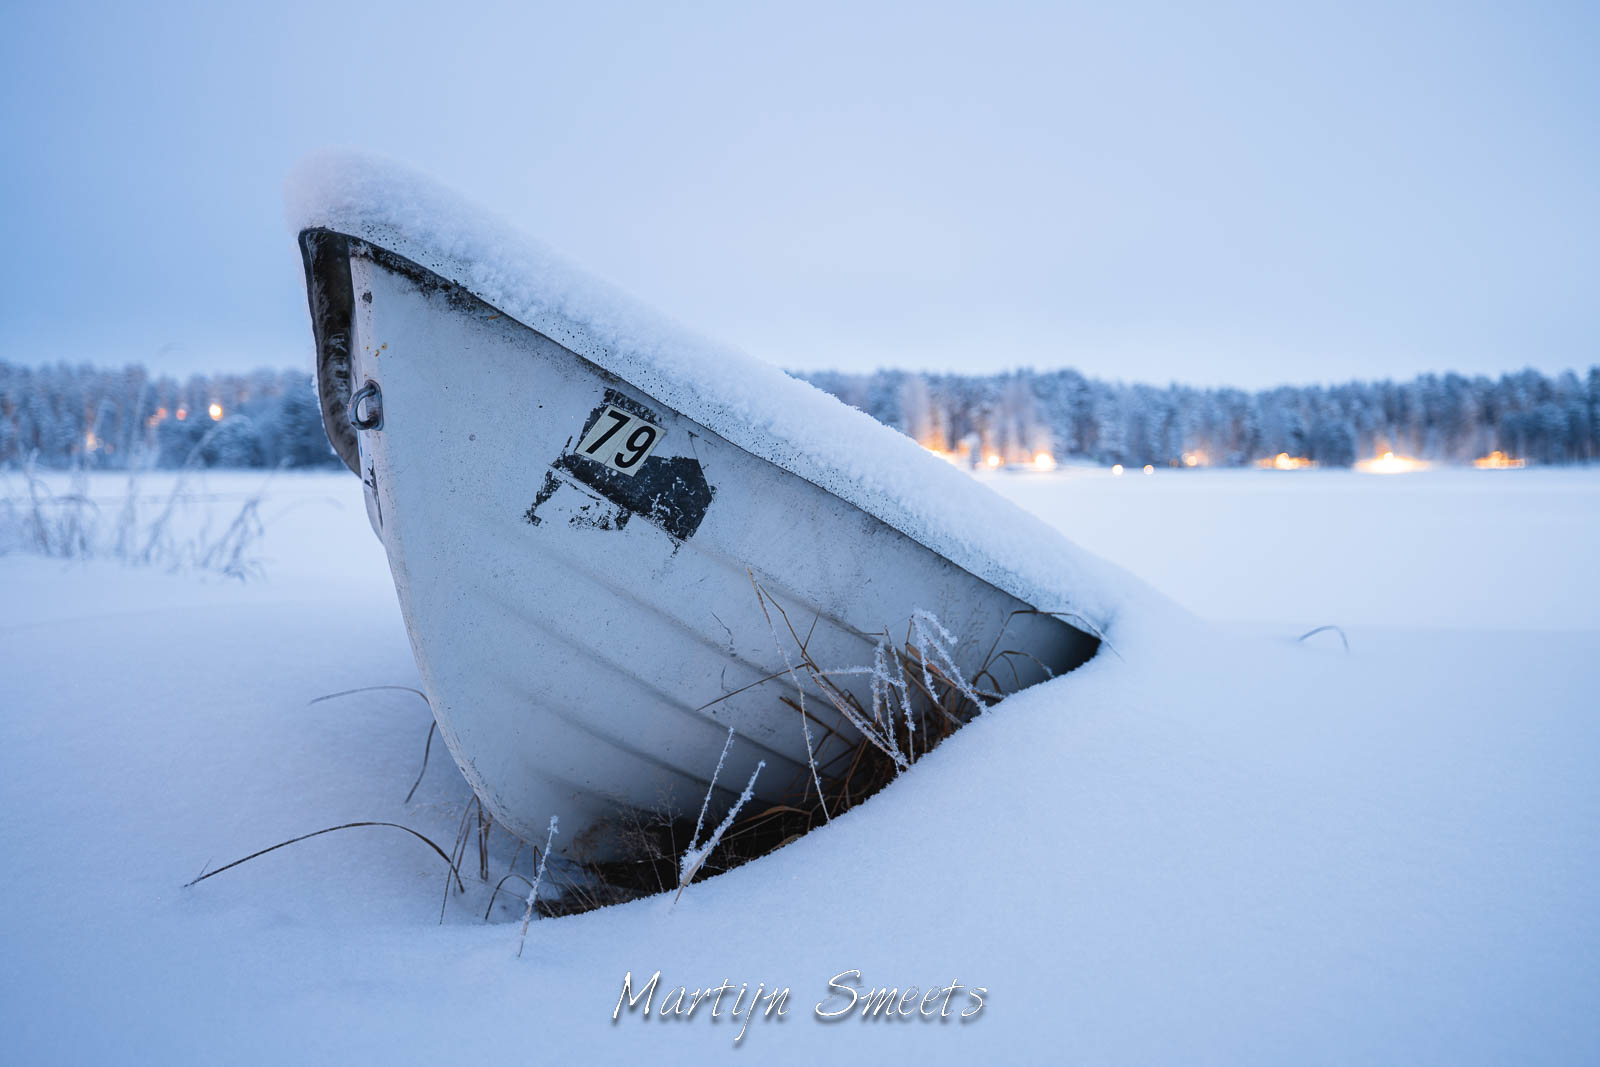 Rowing boat in the snow at Punkaharju, Finland